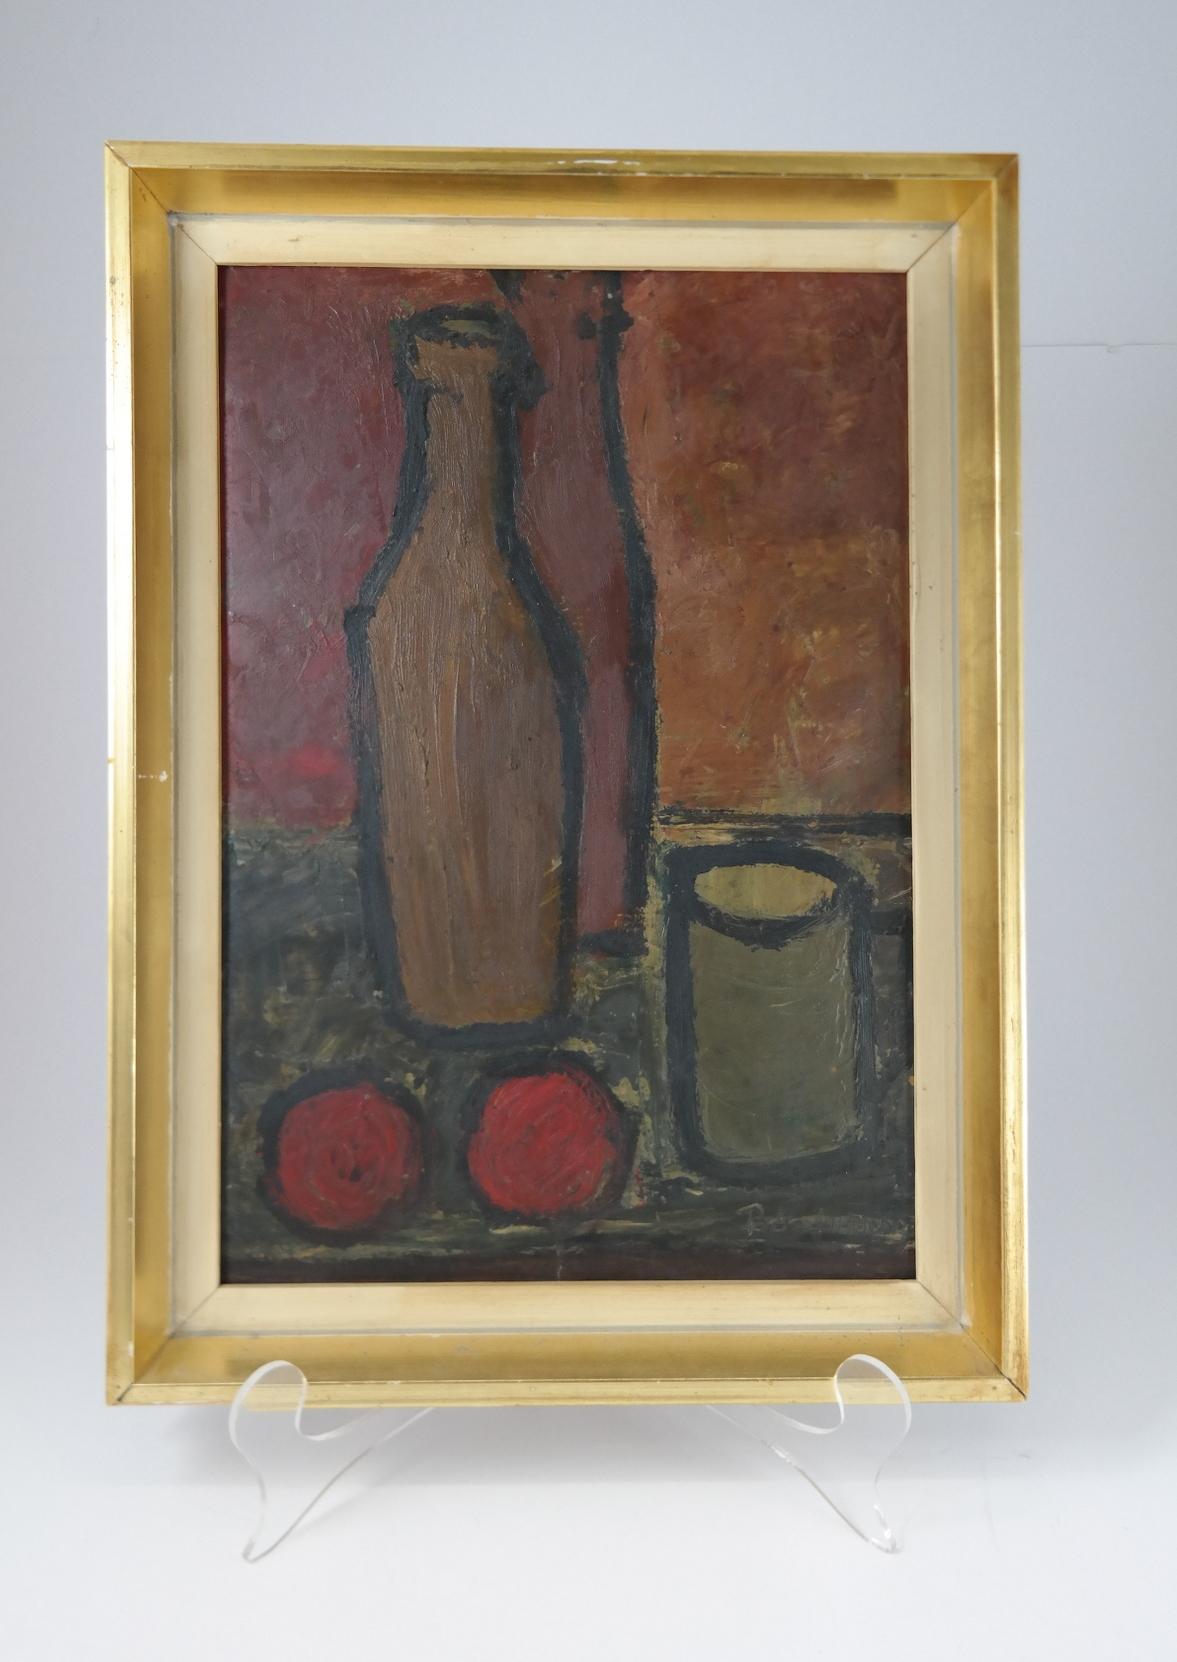 Decorative Mid-century still life by Endre Boszin from 1970.